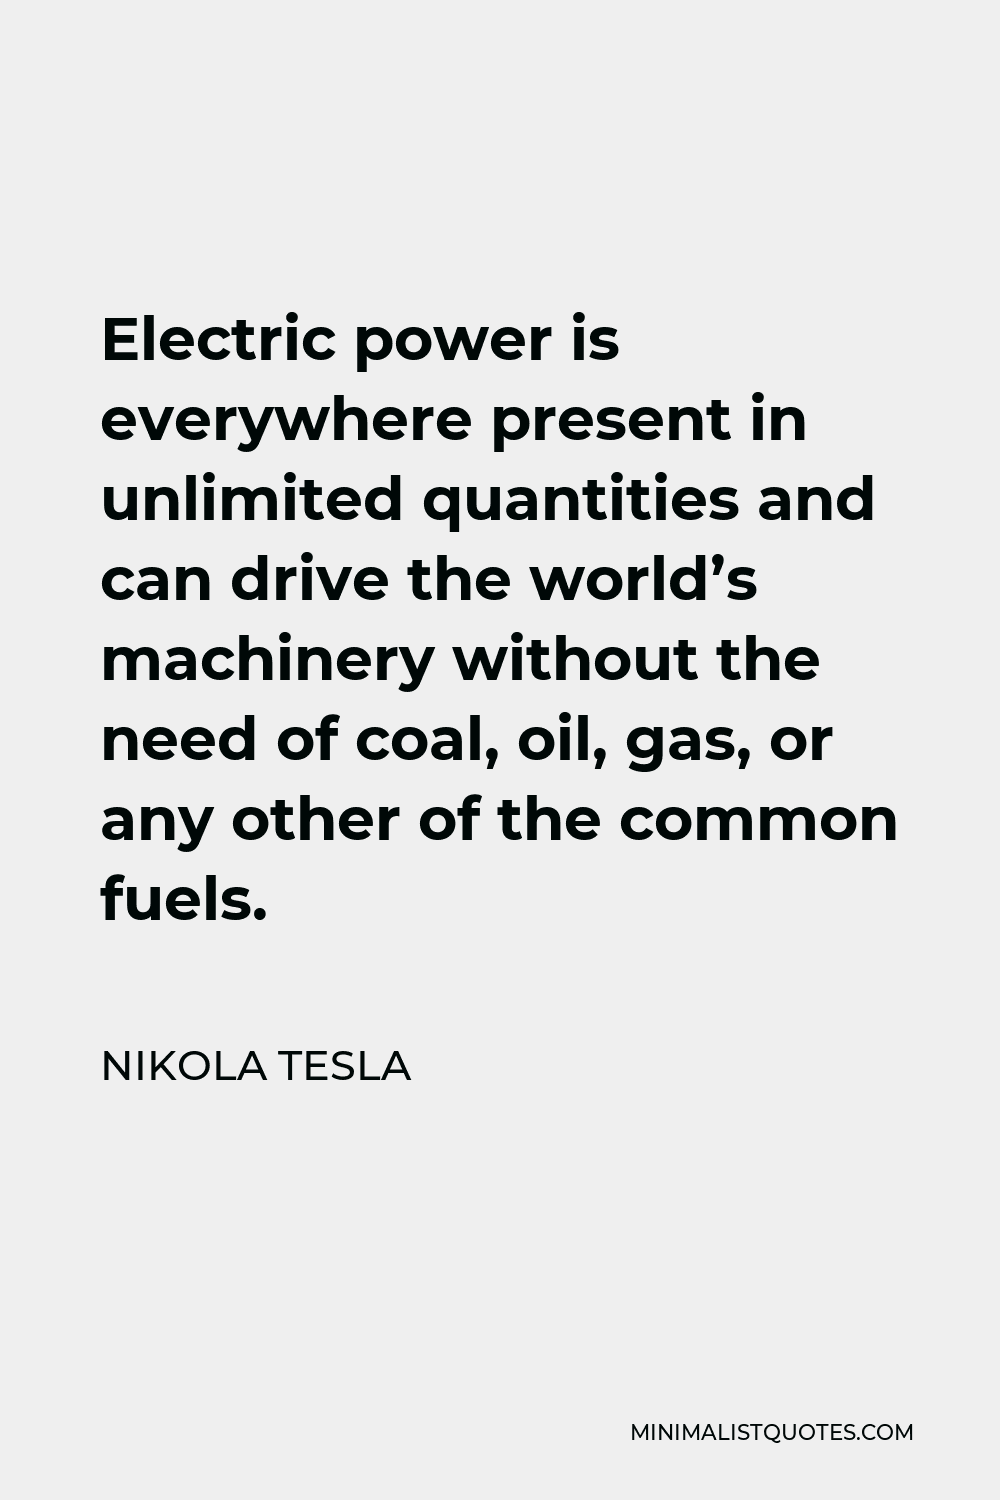 Nikola Tesla Quote - Electric power is everywhere present in unlimited quantities and can drive the world’s machinery without the need of coal, oil, gas, or any other of the common fuels.